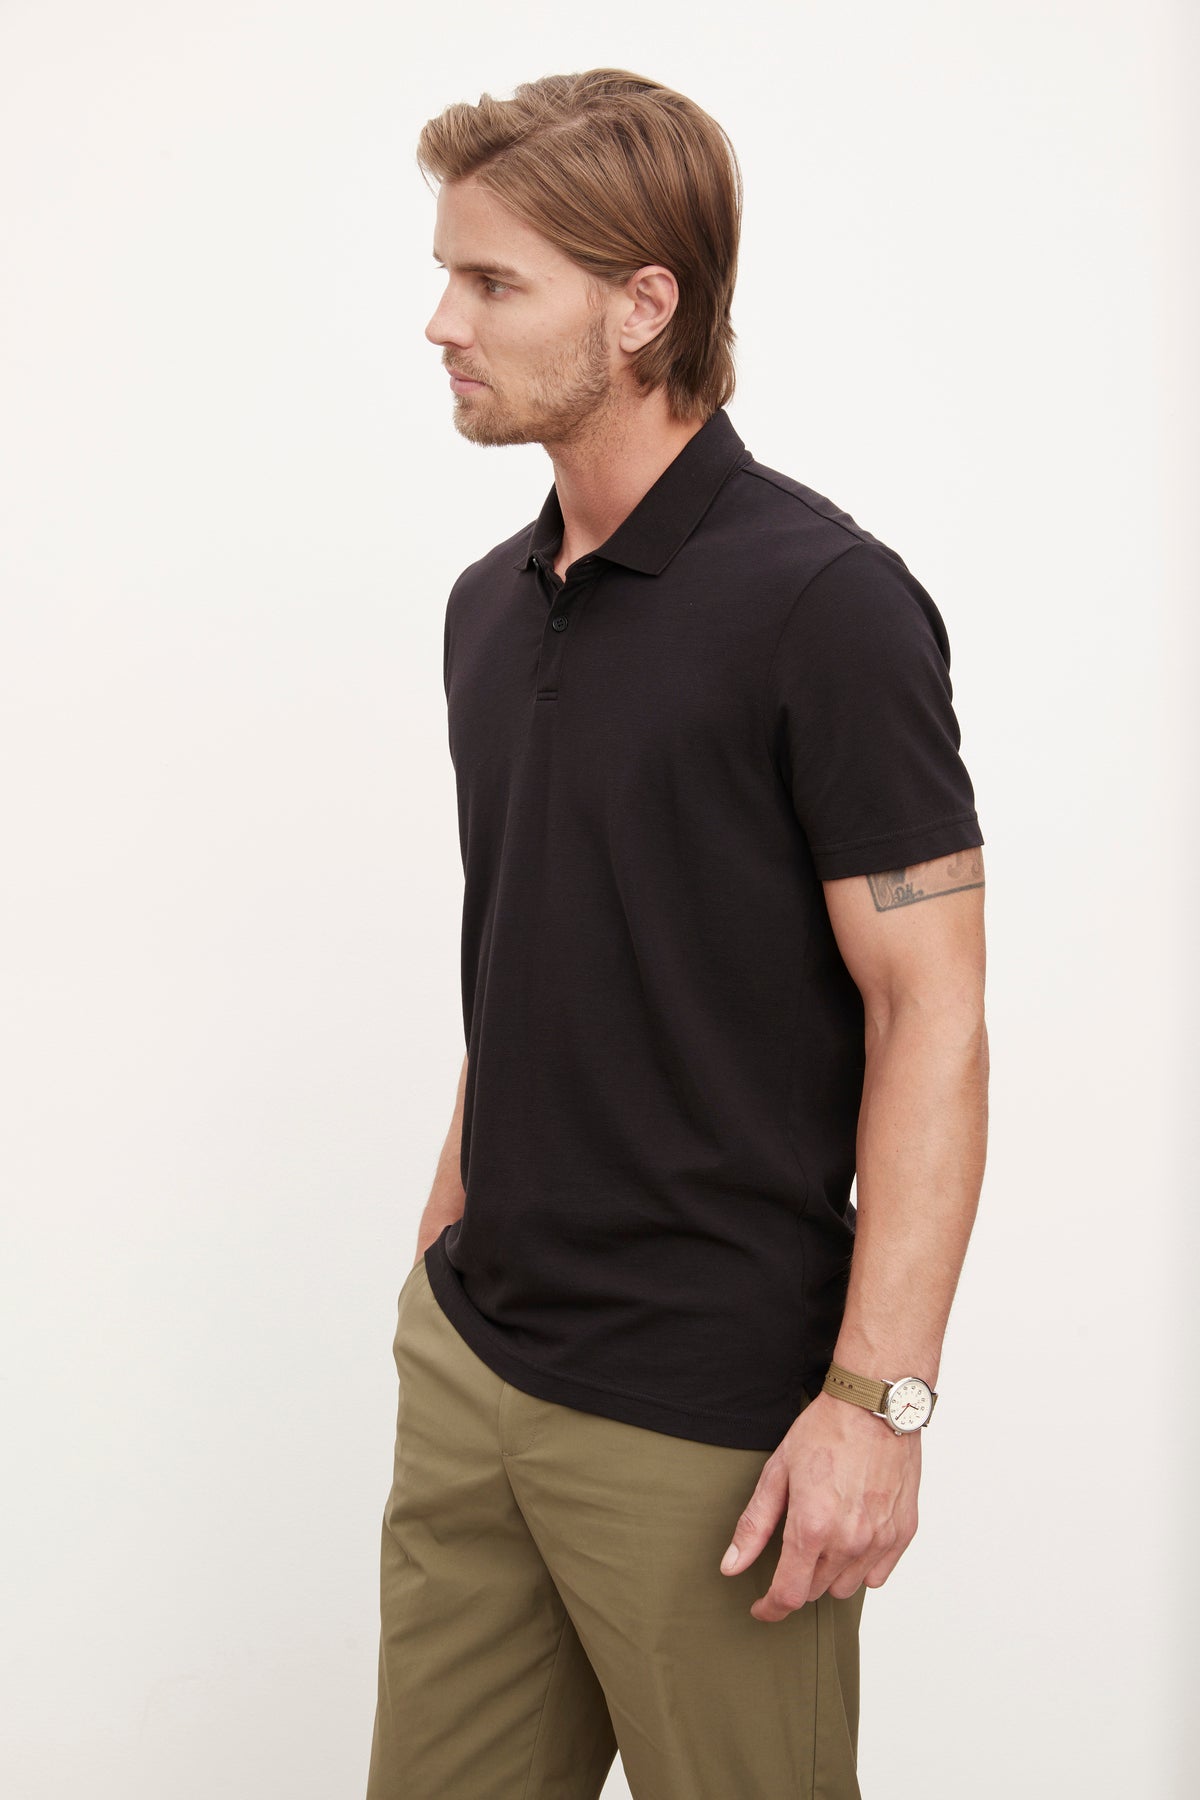   A man wearing a Velvet by Graham & Spencer Willis Pique Polo shirt and khaki pants. 